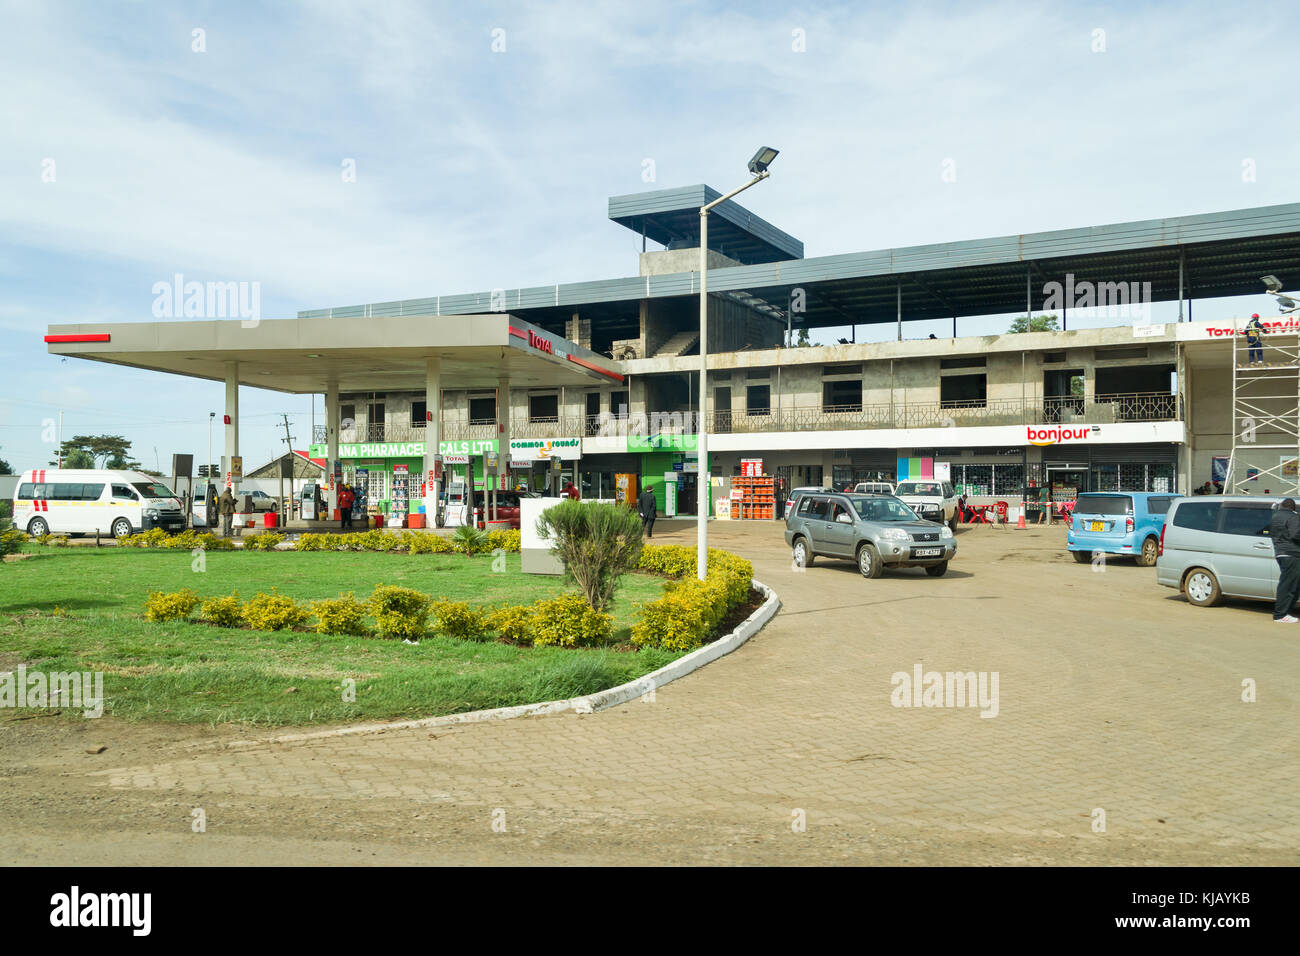 A Total petrol station with buildings under construction behind it and customers and vehicles in forecourt, Kenya, East Africa Stock Photo